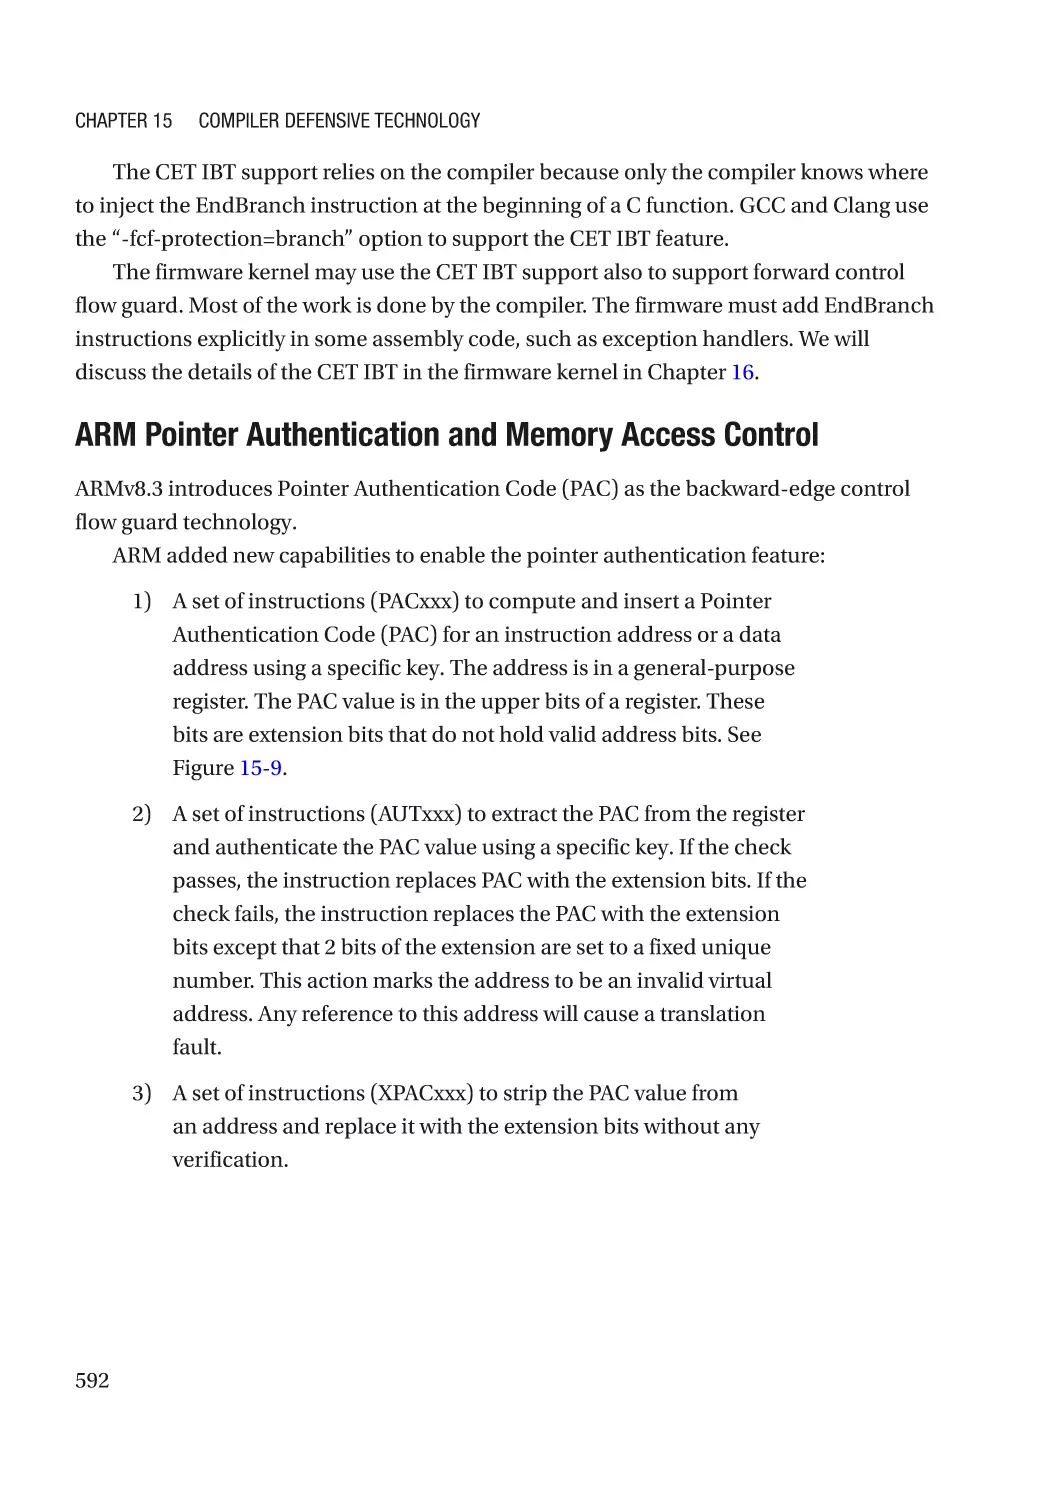 ARM Pointer Authentication and Memory Access Control